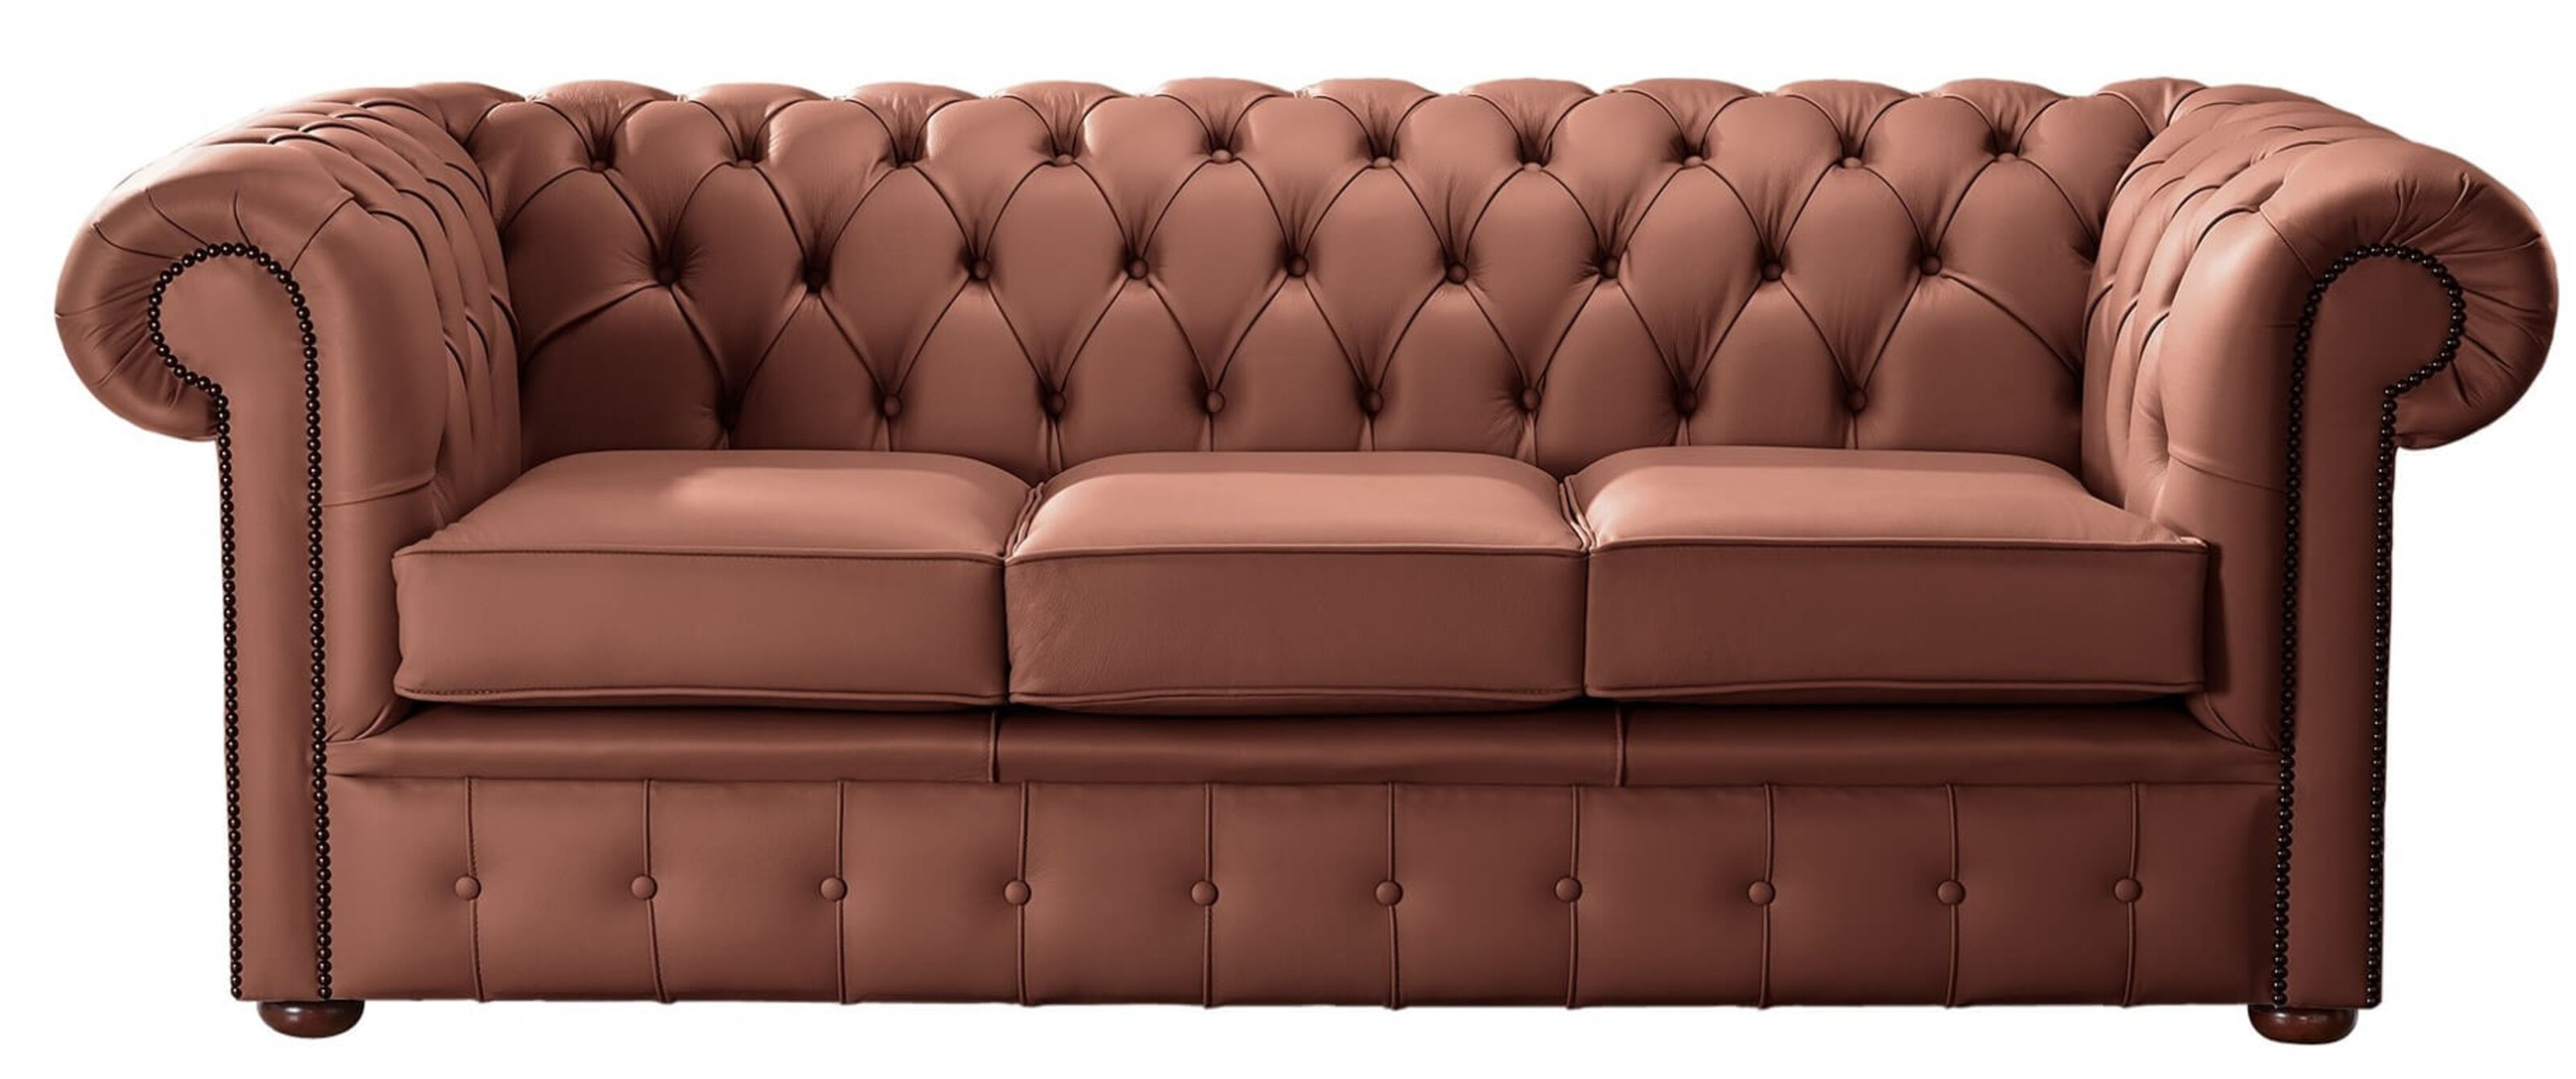 The Artistry Behind Crafting Chesterfield Sofas From Design to Perfection  %Post Title